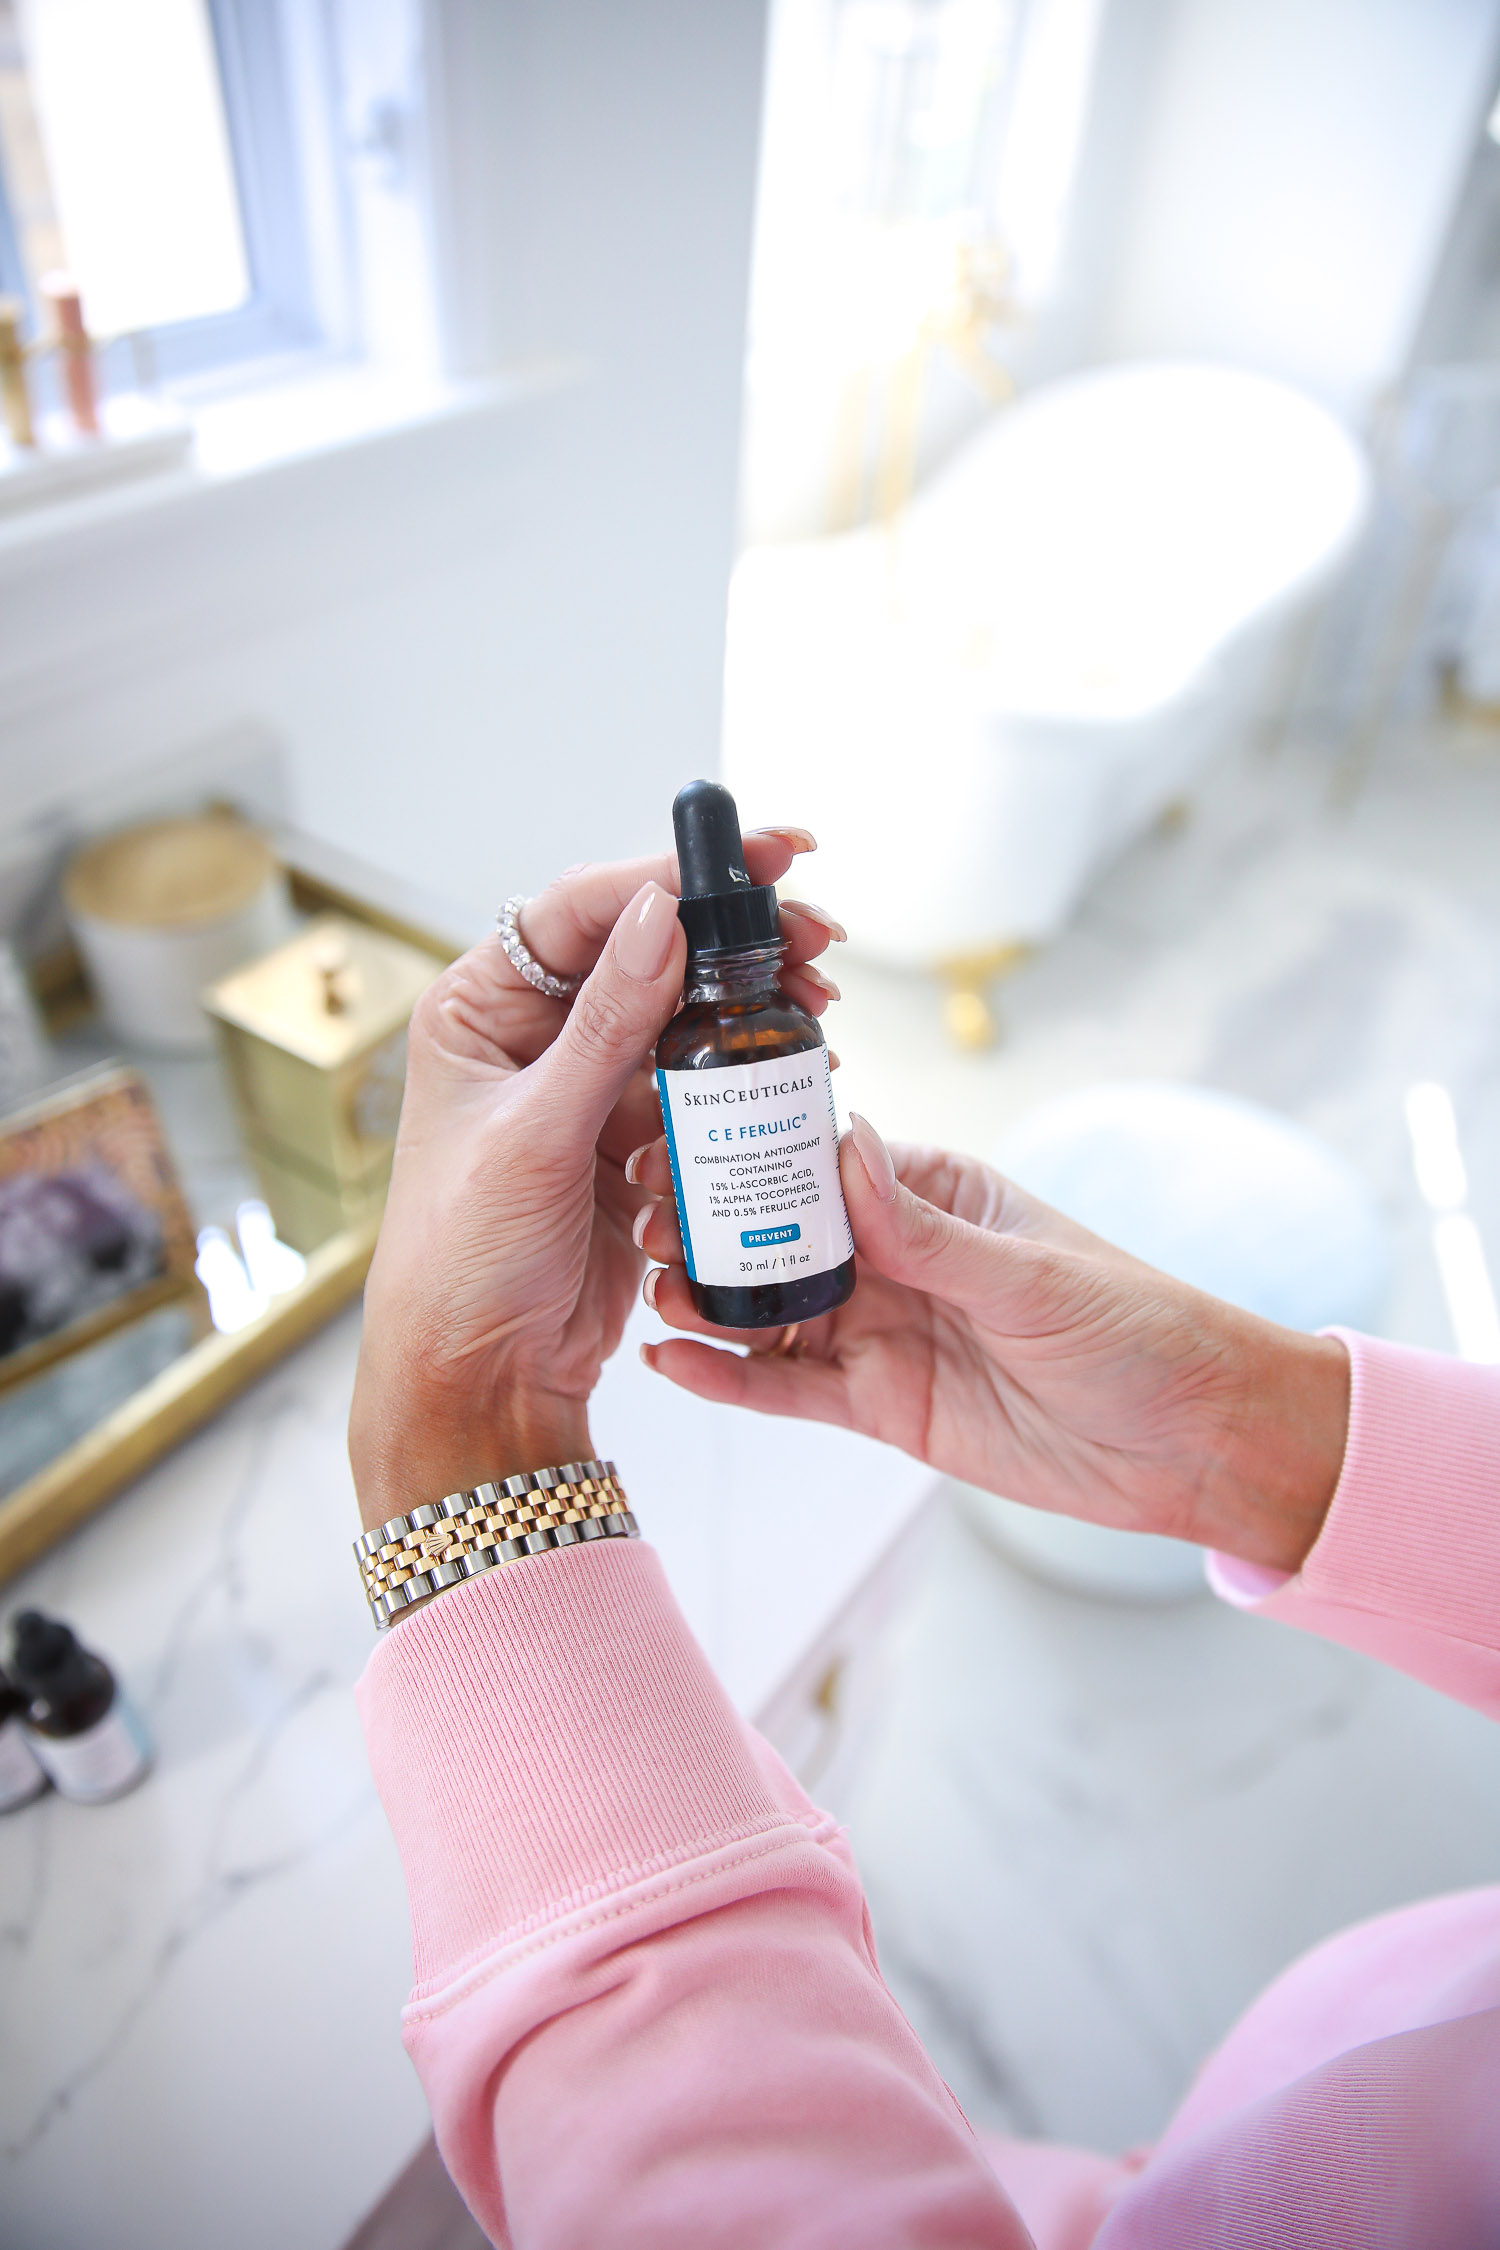 Skinceuticals CE Ferulic SilyMarin Phloretin CF, best Vitamim C serum, CE Ferulic vs Phloretin CF, why do you need Vitamin C, emily gemma skincare |Vitamin C Skincare by popular beauty blog, The Sweetest Thing: image of Emily Gemma standing in her bathroom and wearing a pink sweatsuit while holding a bottle SkinCeuticals skin care product. 